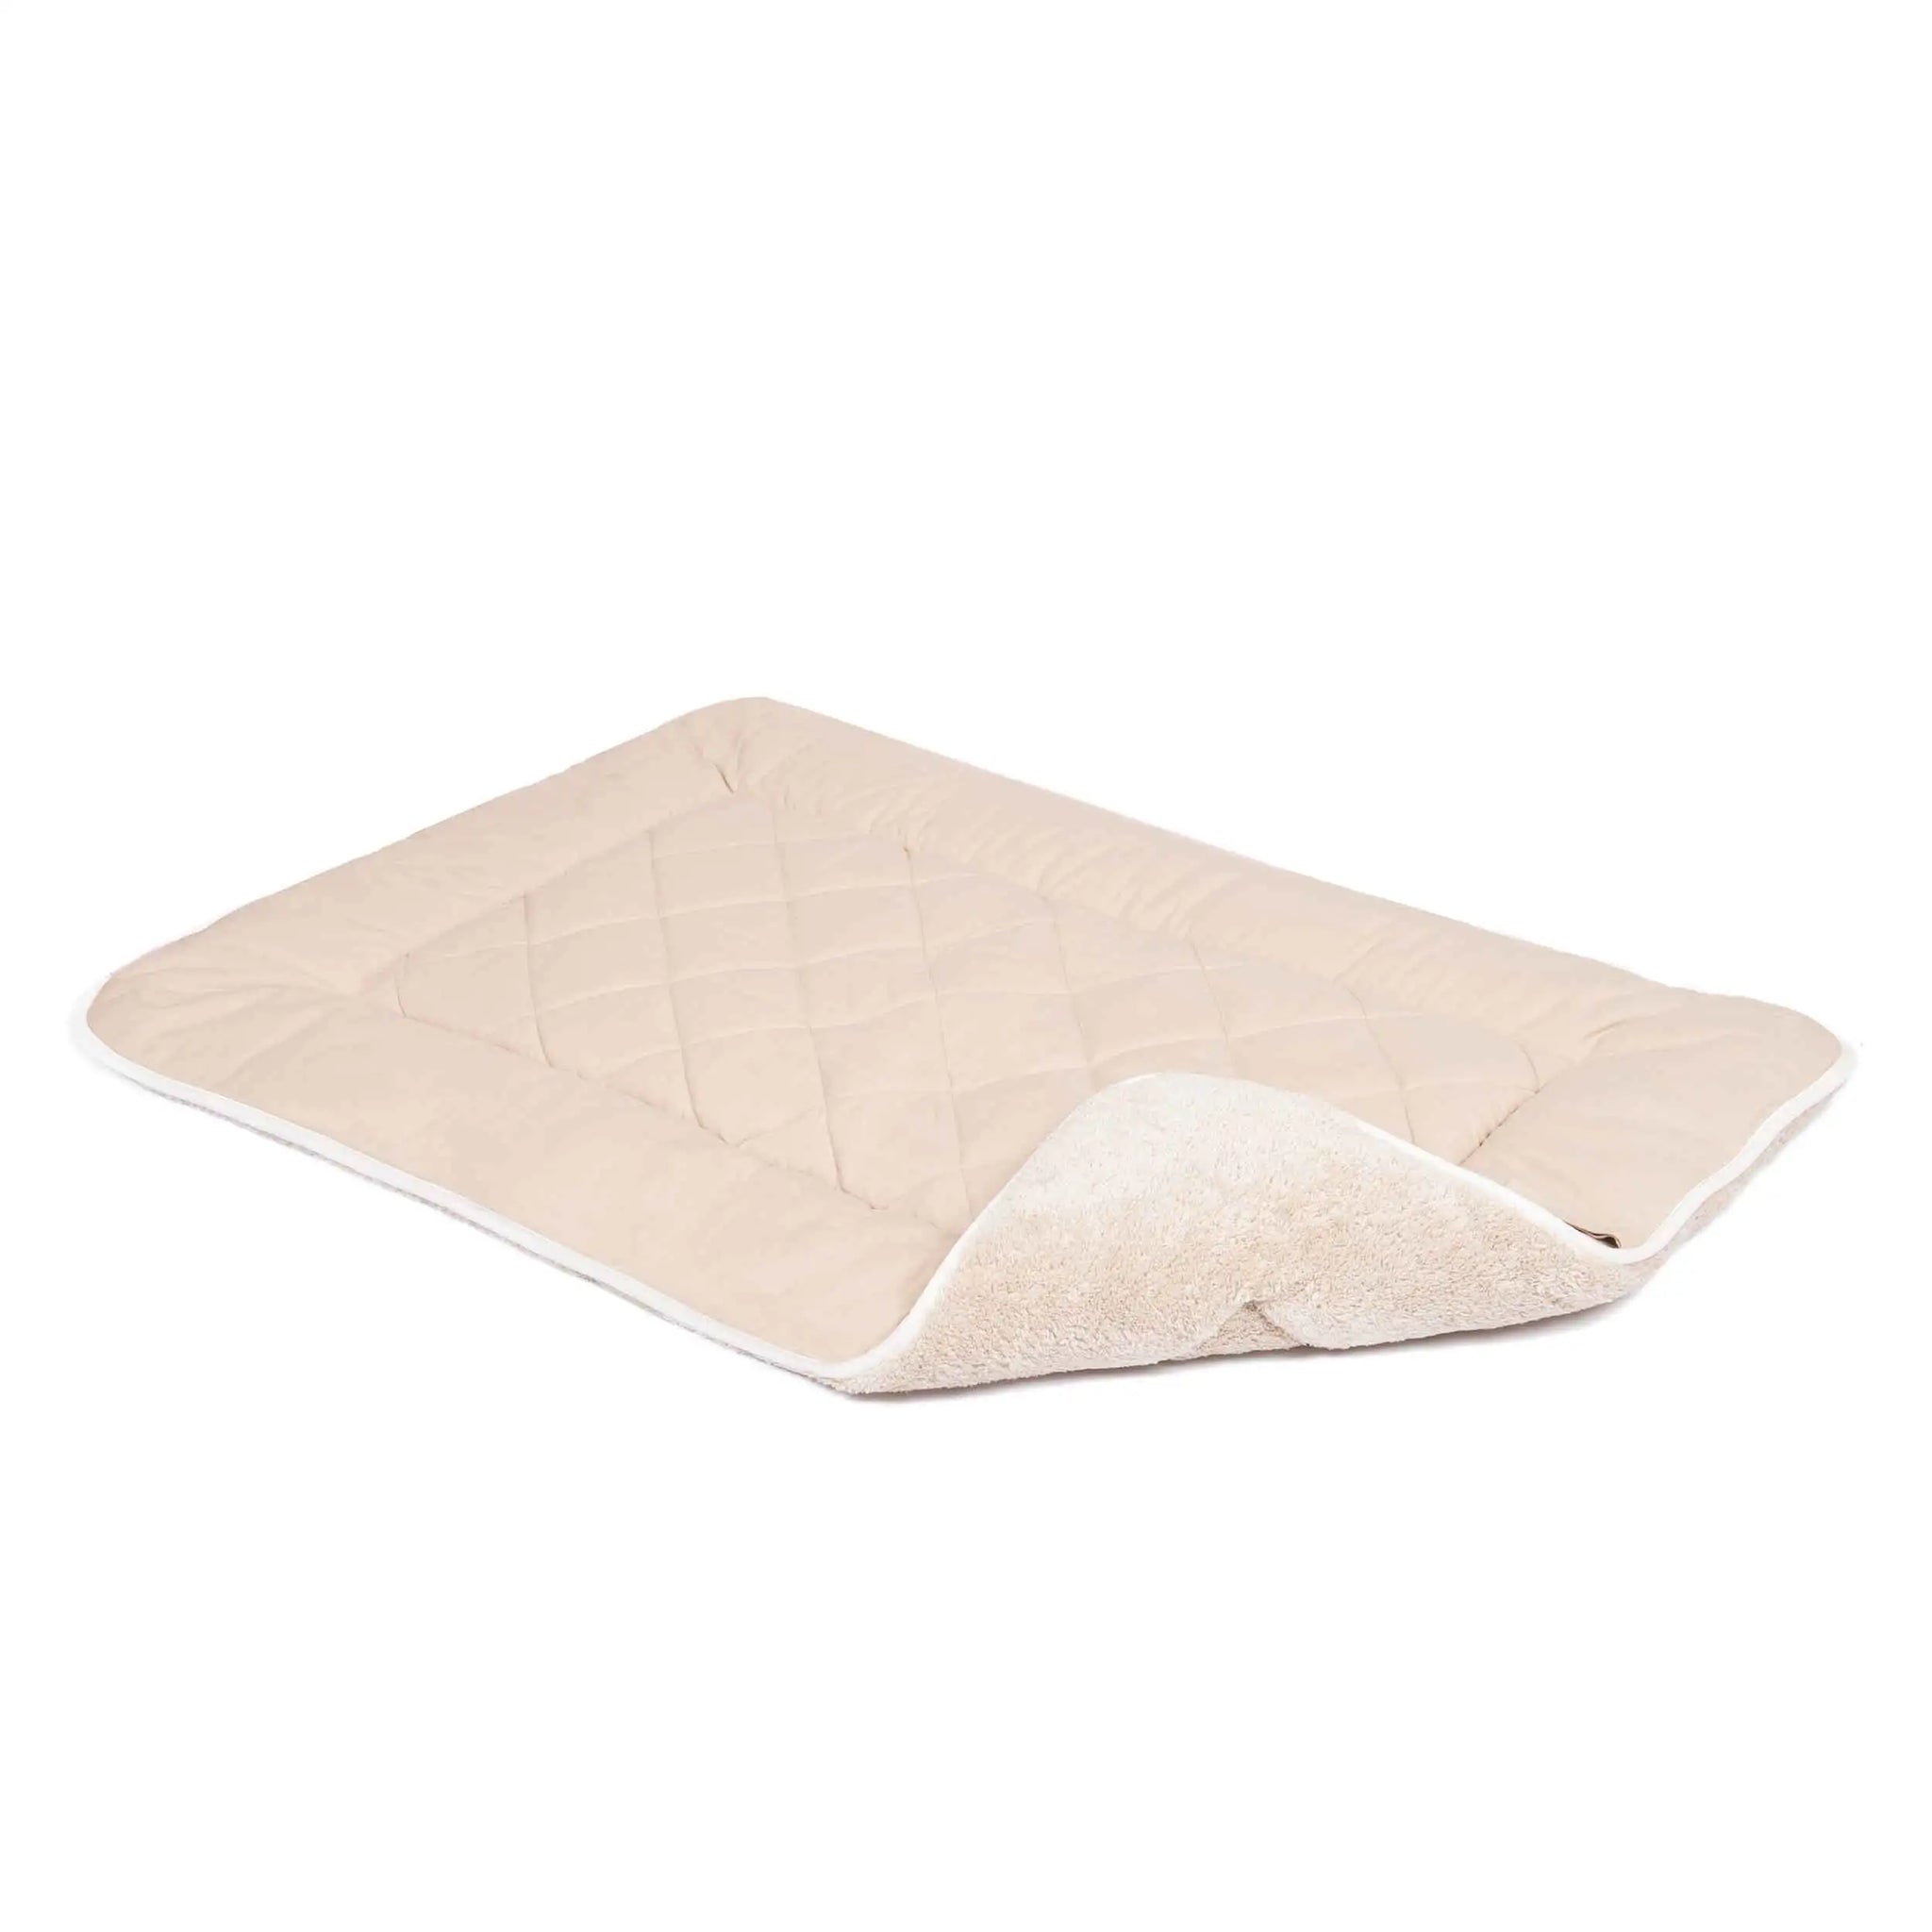 DGS Pet Products Pet Cotton Canvas Sleeper Cushion Extra Extra Large Sand 30" x 48" x 1"